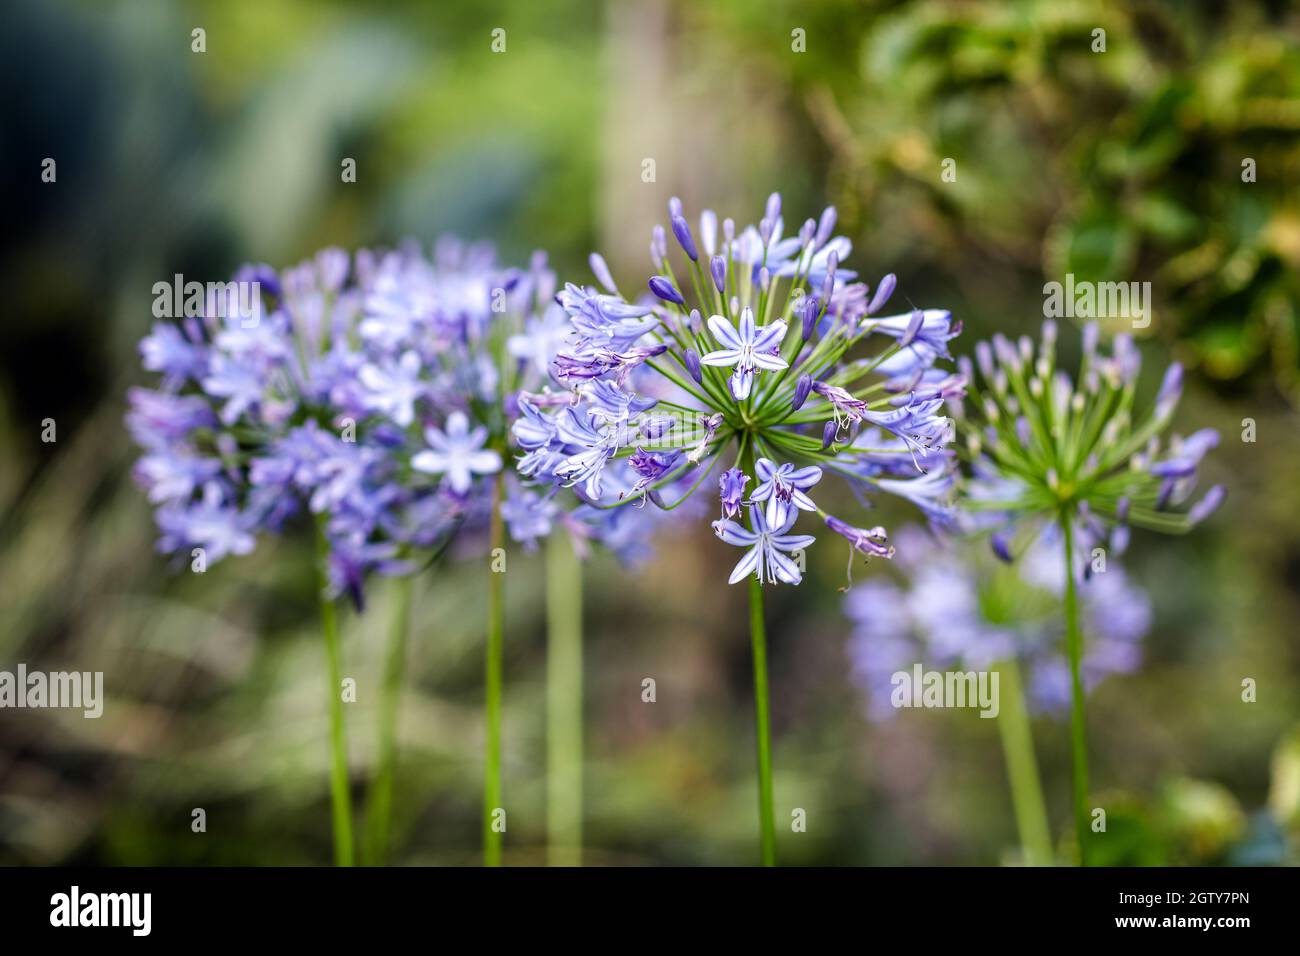 Close-up Of Purple Flowering Plants In Park Stock Photo